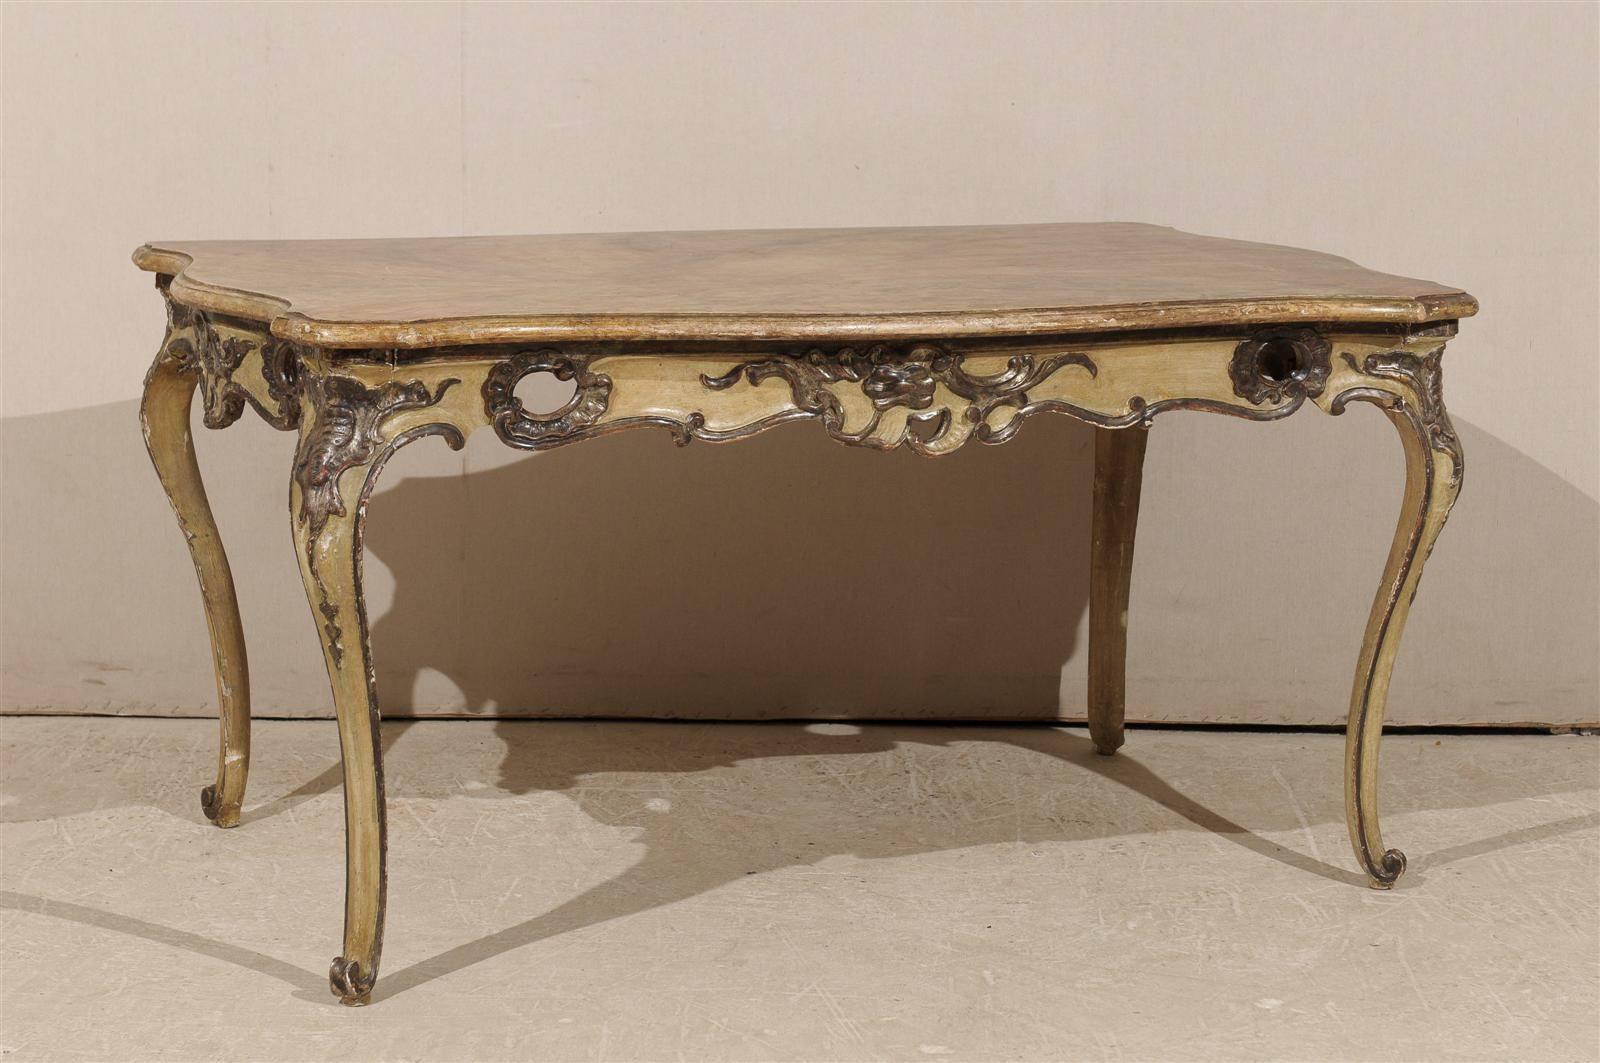 A Mid 19th Century Italian Table / Desk with Original Paint and Faux Marble Top, Wonderfully Carved Apron and Cabriole Legs on Scroll Feet.

This 19th Century Italian table, with its beautifully carved apron adorned with Rococo and pierced motifs